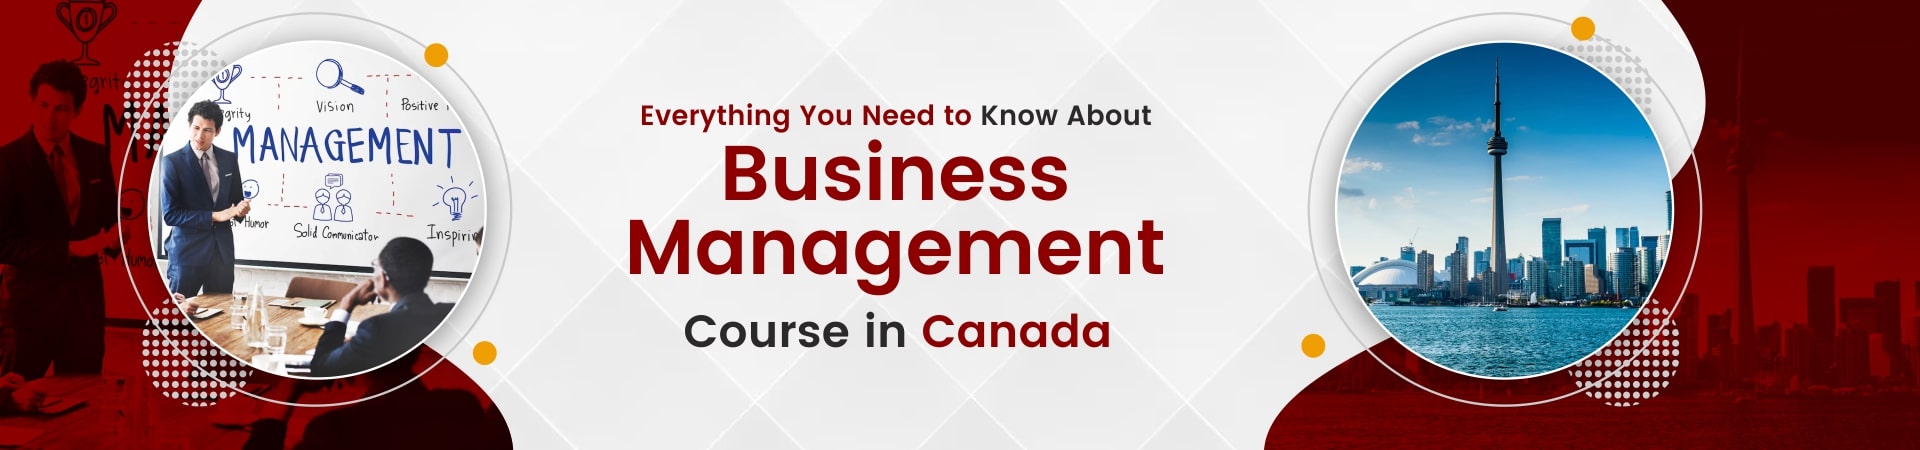 Everything You Need to Know About Business Management Course in Canada